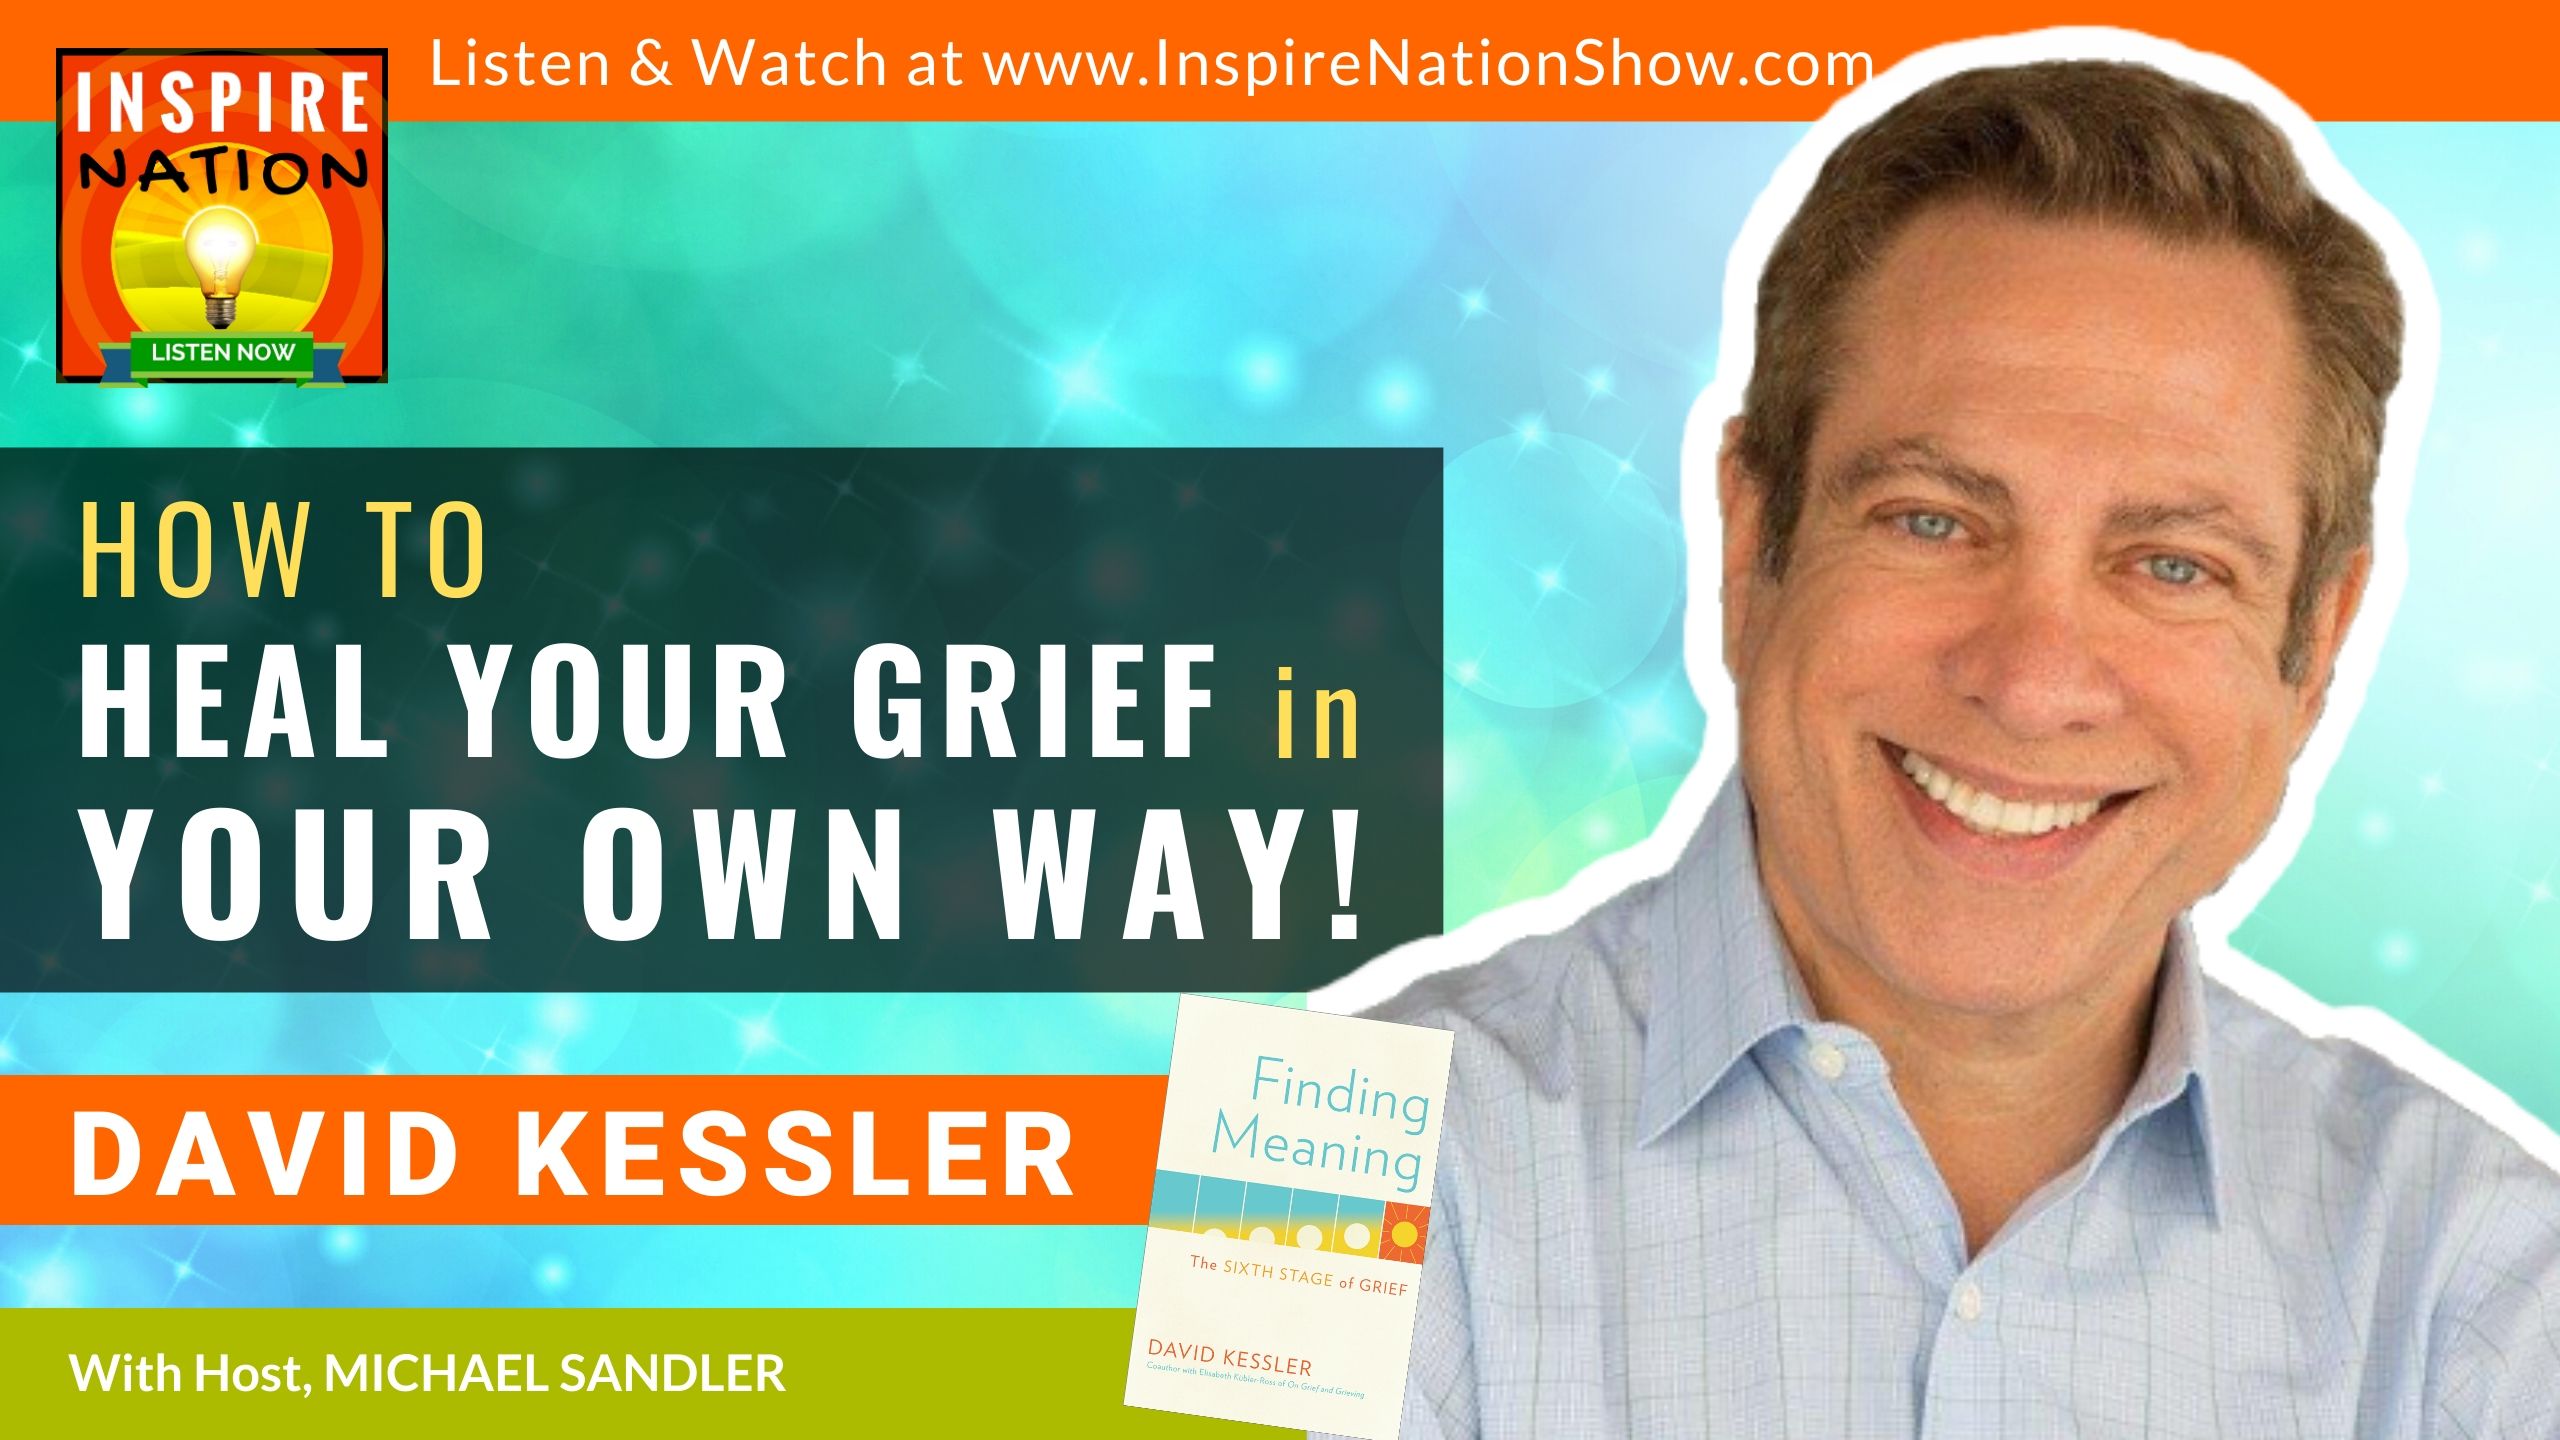 HOW TO HEAL FROM GRIEF IN YOUR OWN WAY: THE POWER OF FINDING MEANING!!! David Kessler